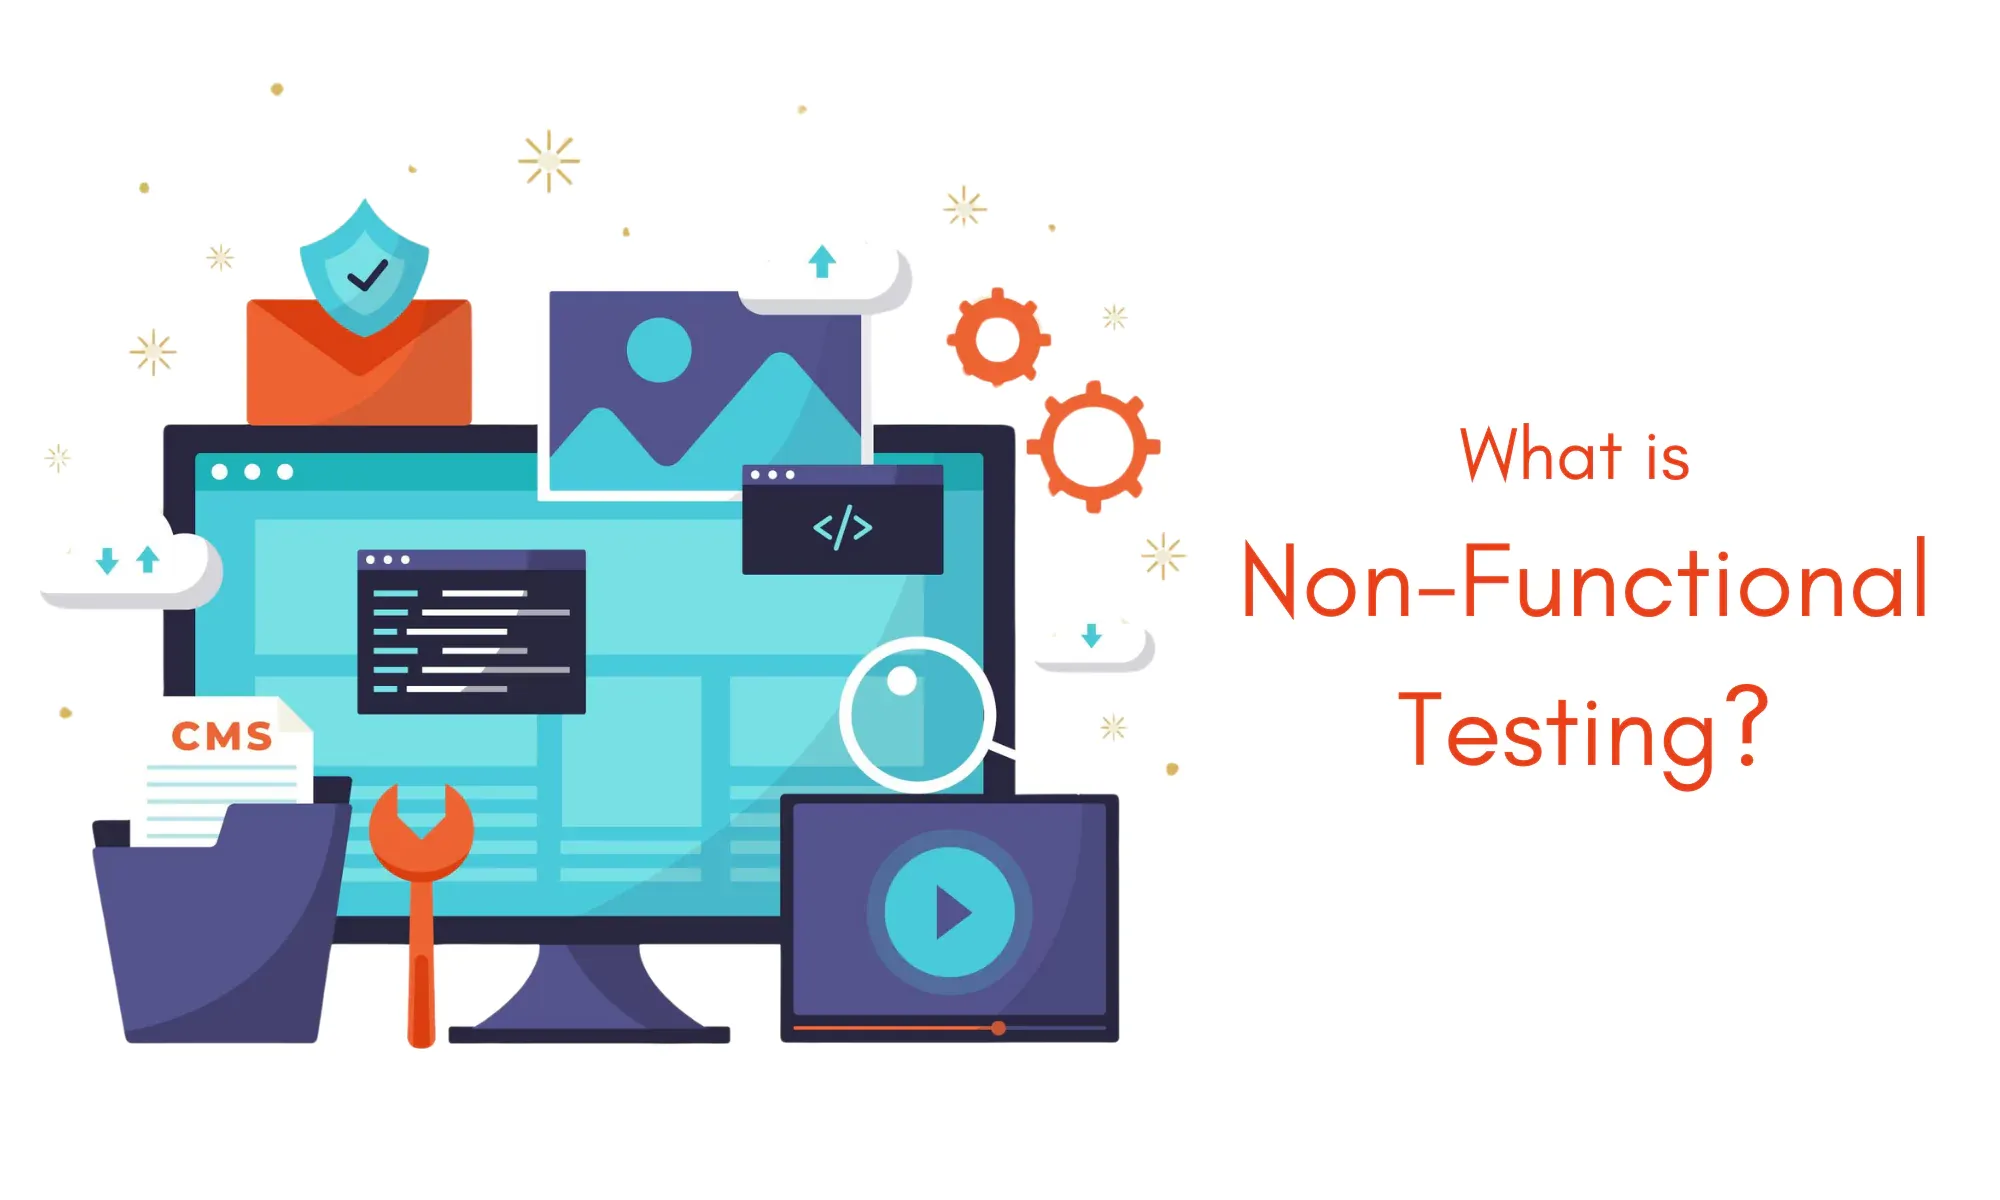 What is Non-Functional Testing